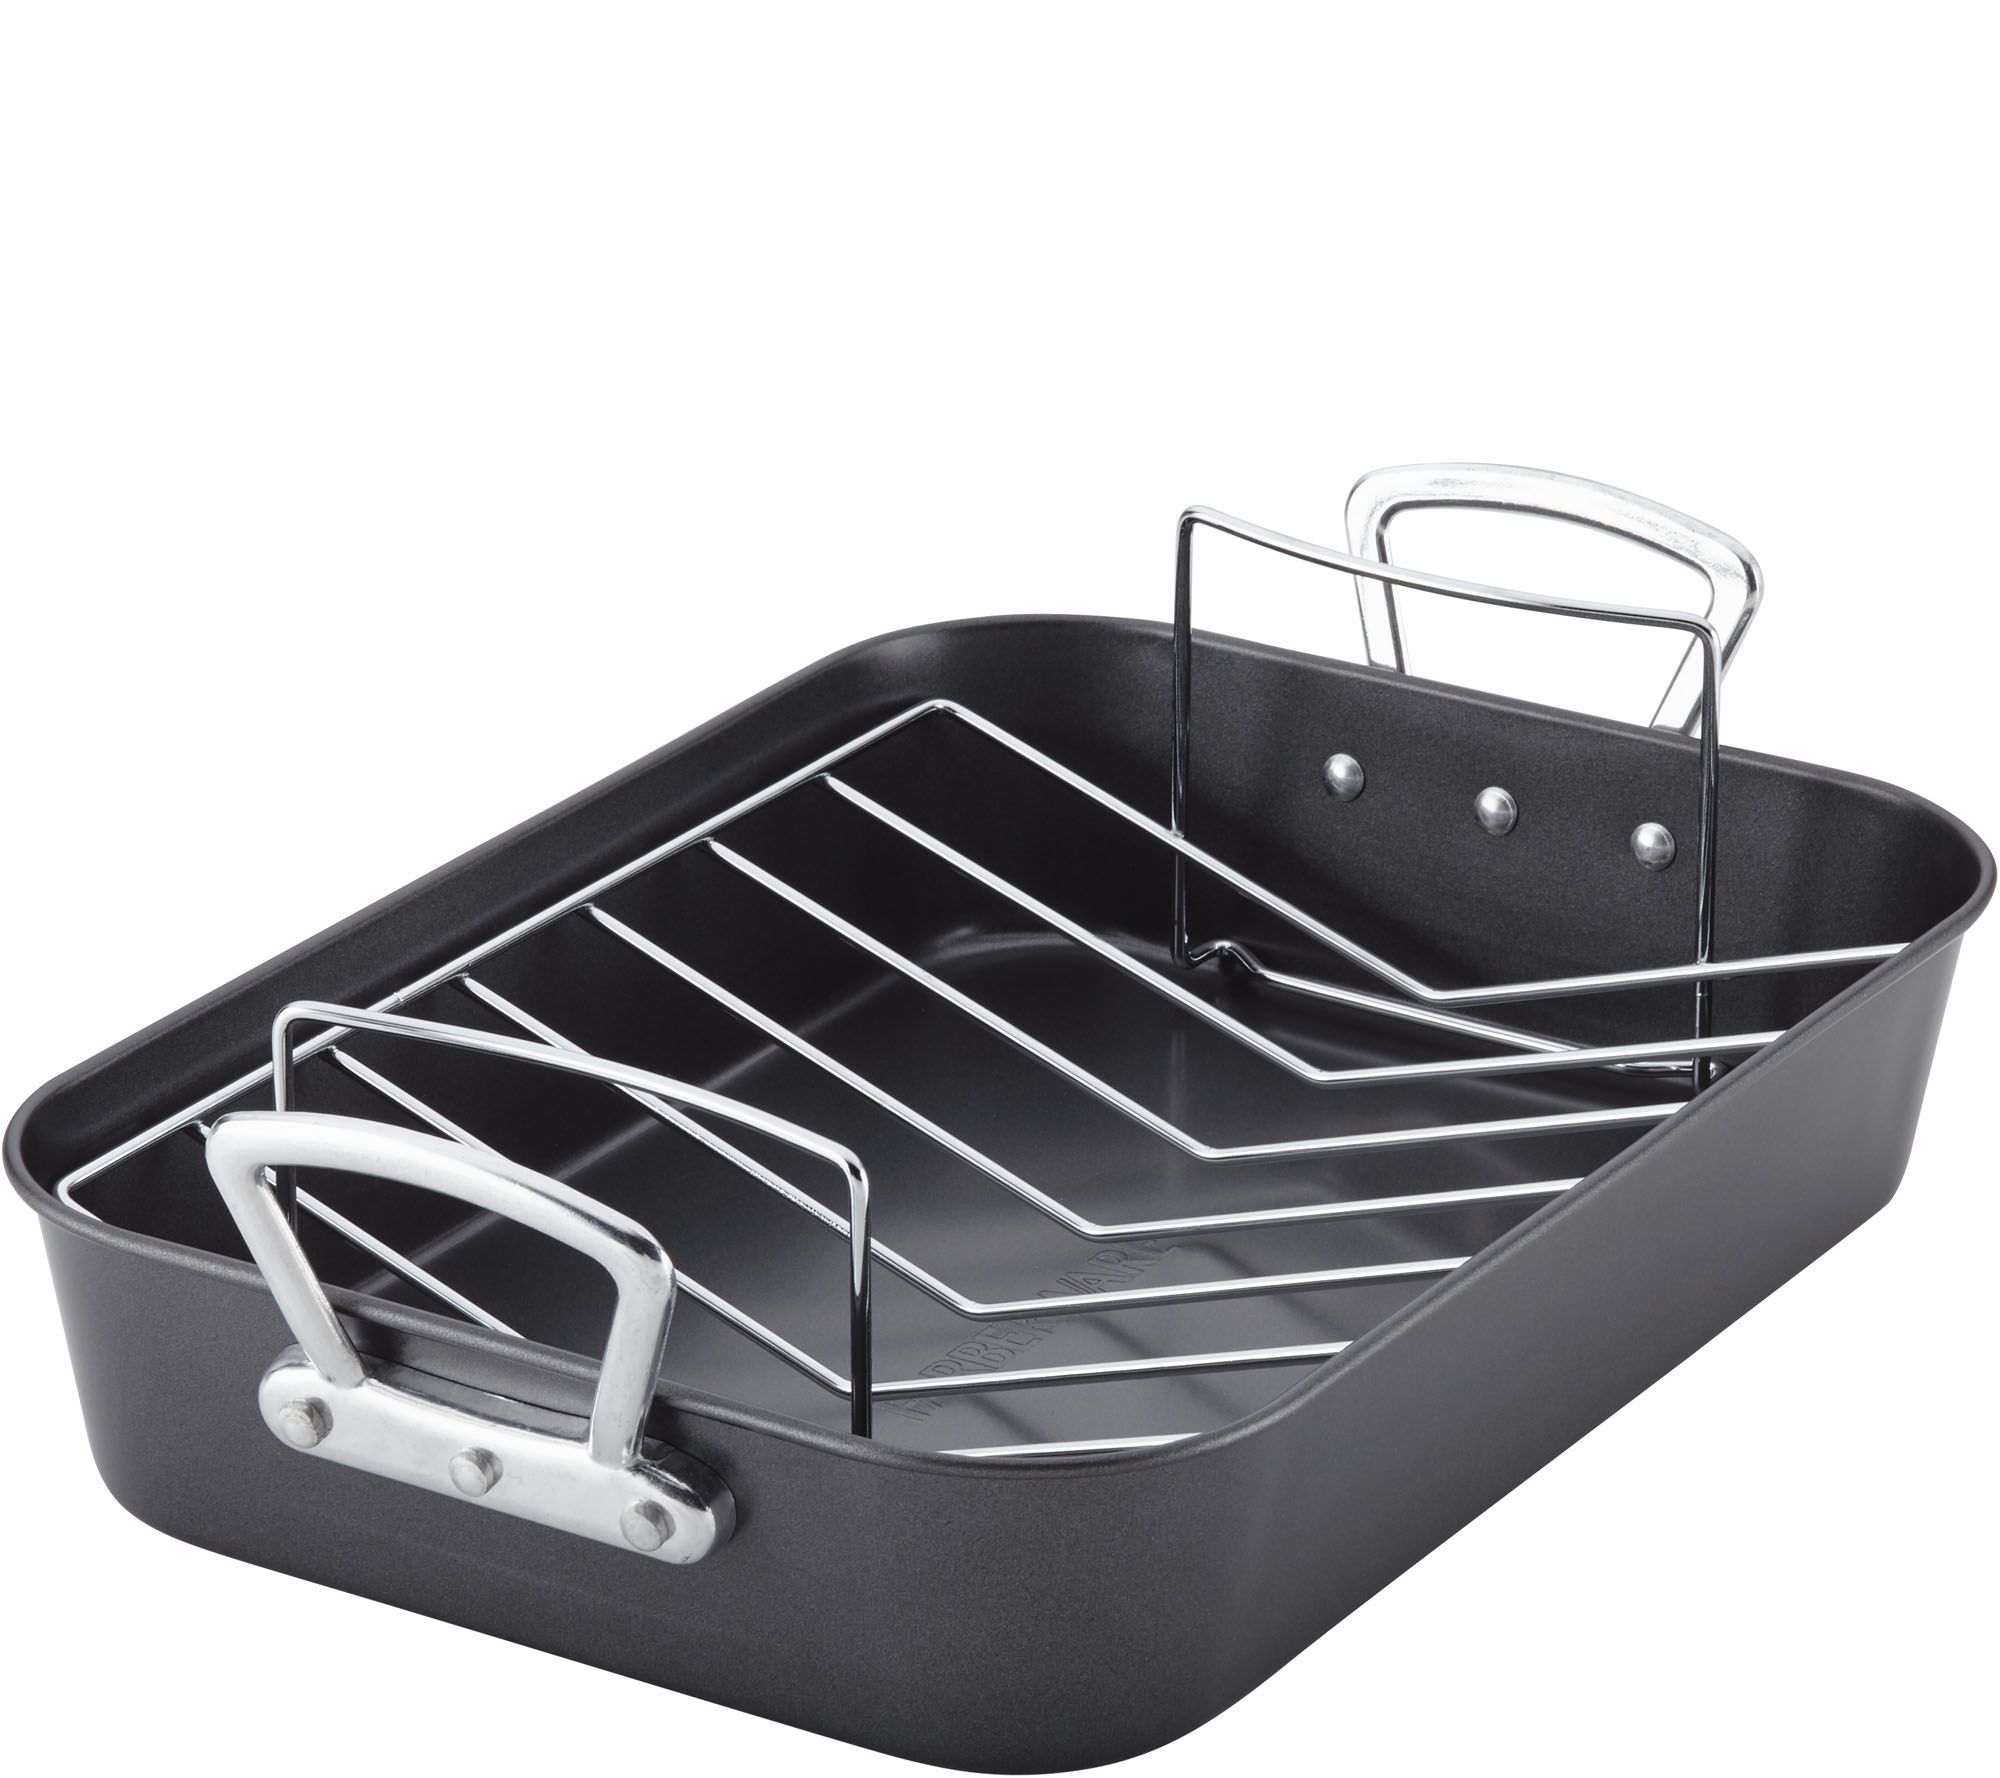 Open dish. Prestige non-Stick Oven Roaster with Rack. Roasting Pan.